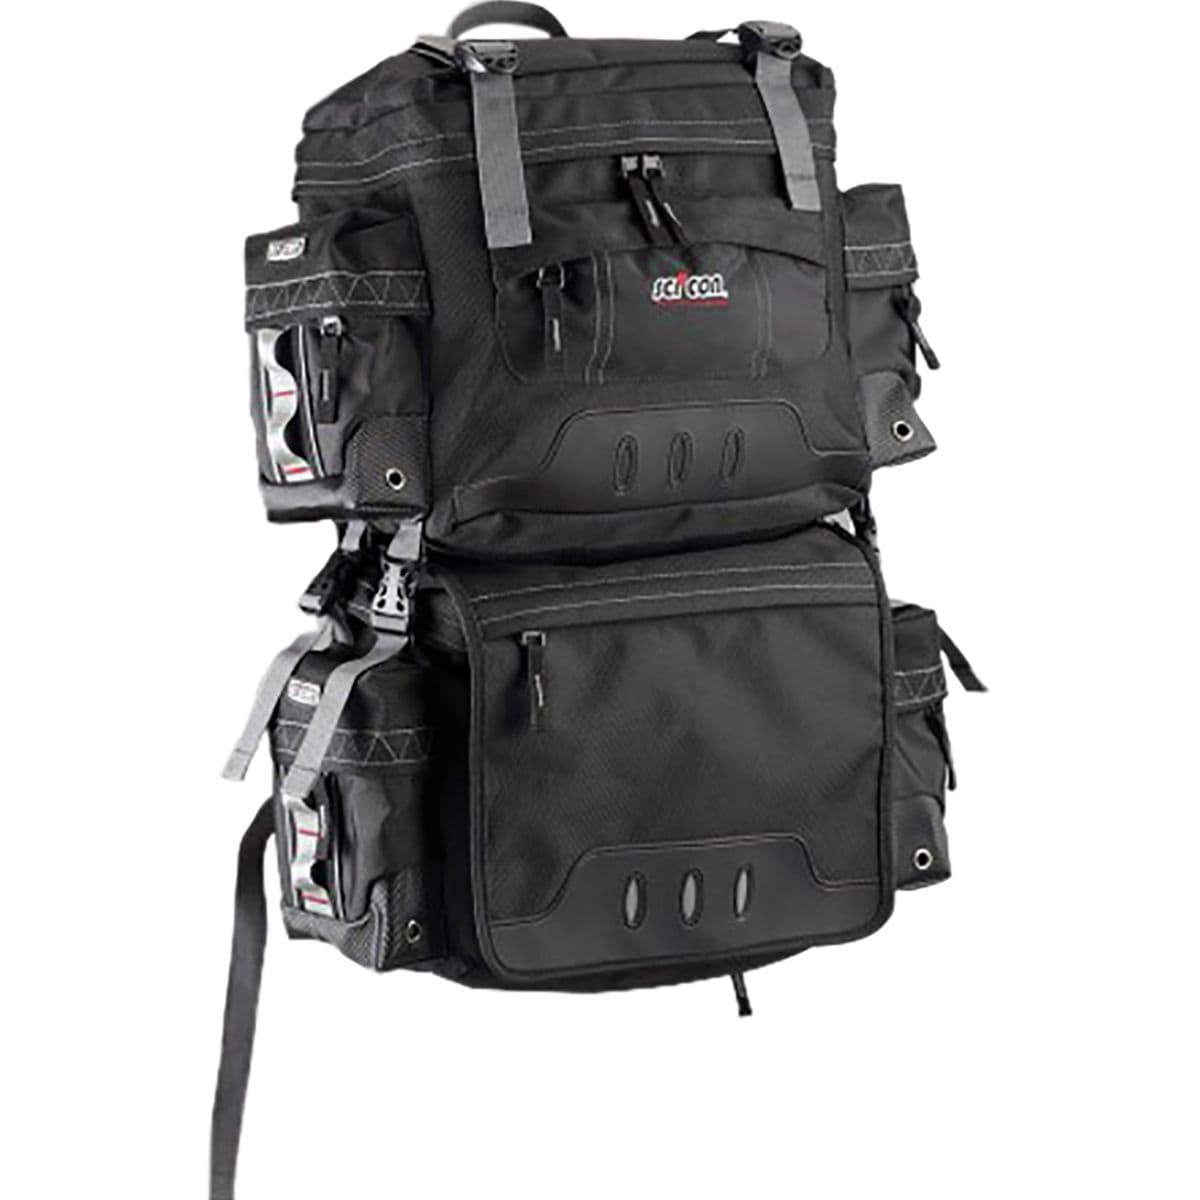 SciCon Transalp 2.0 Backpack & Panniers